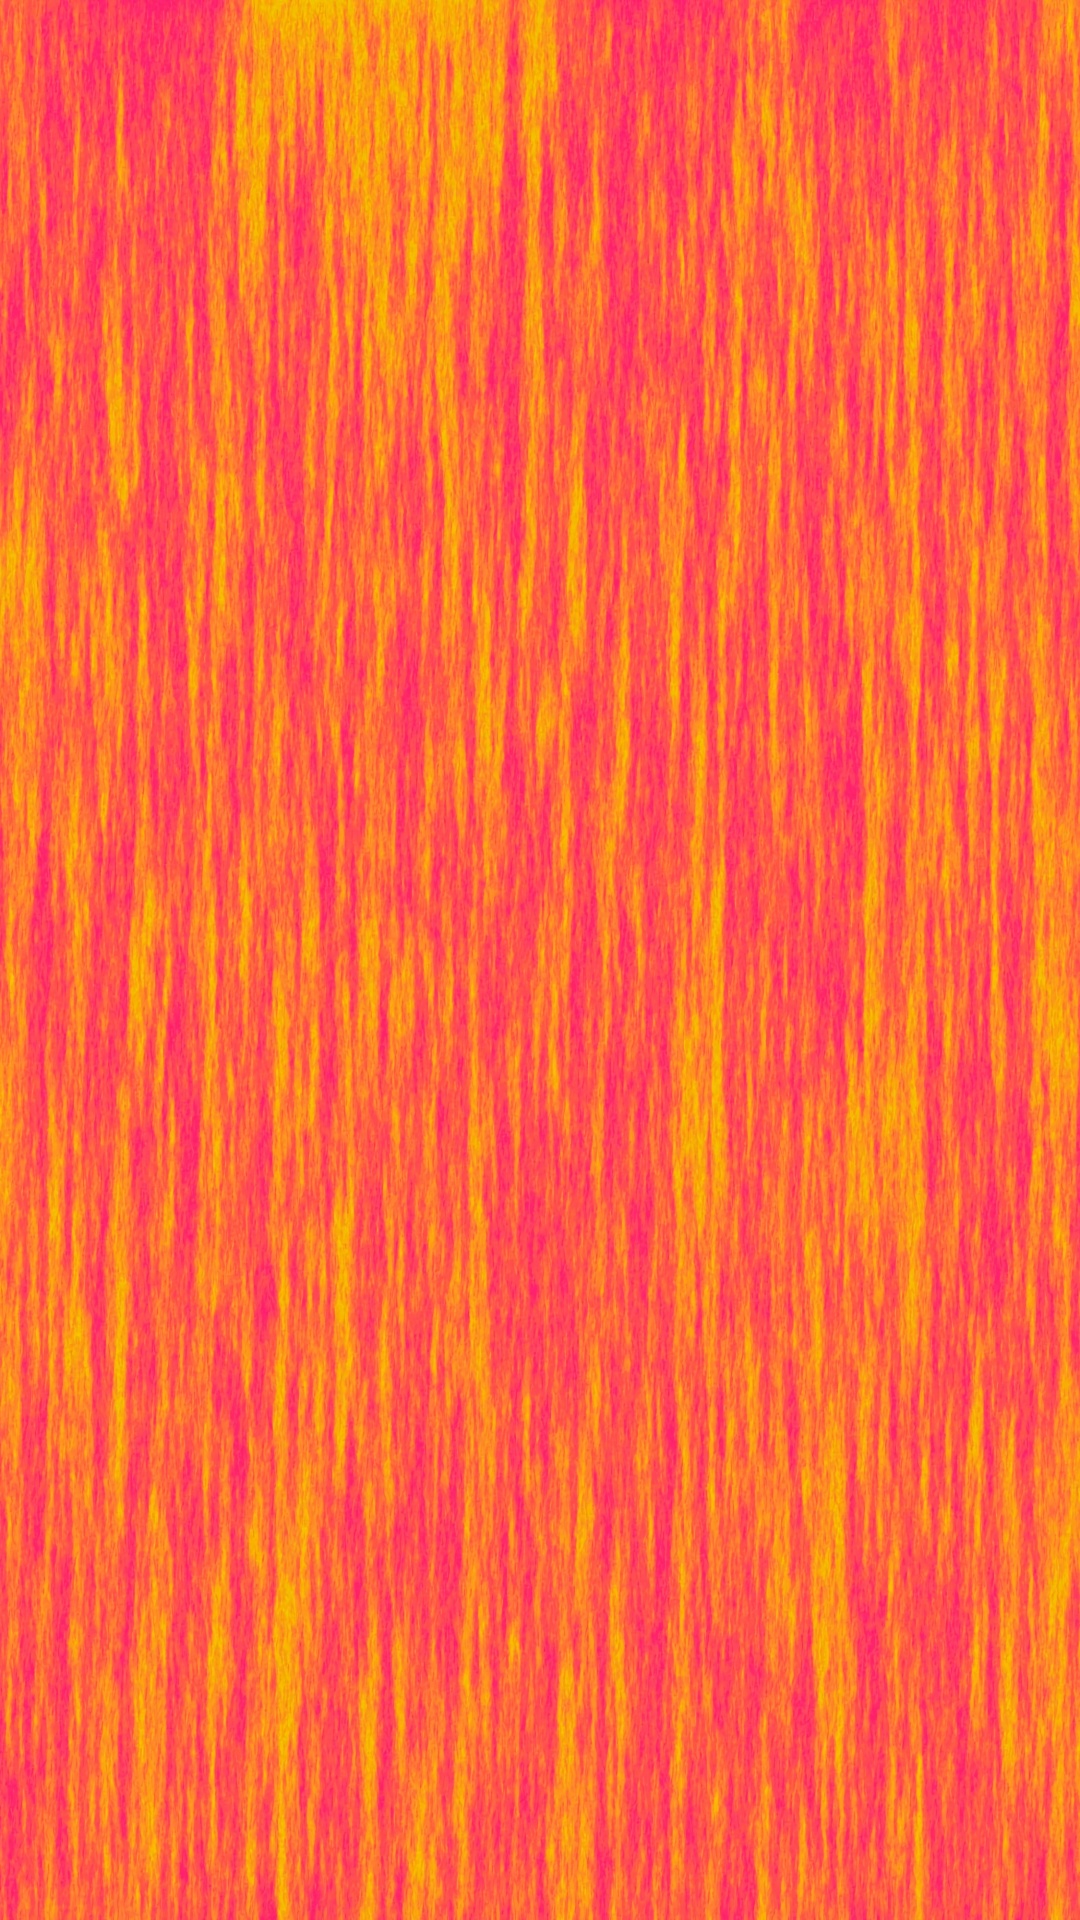 Orange and Yellow Striped Textile. Wallpaper in 1080x1920 Resolution